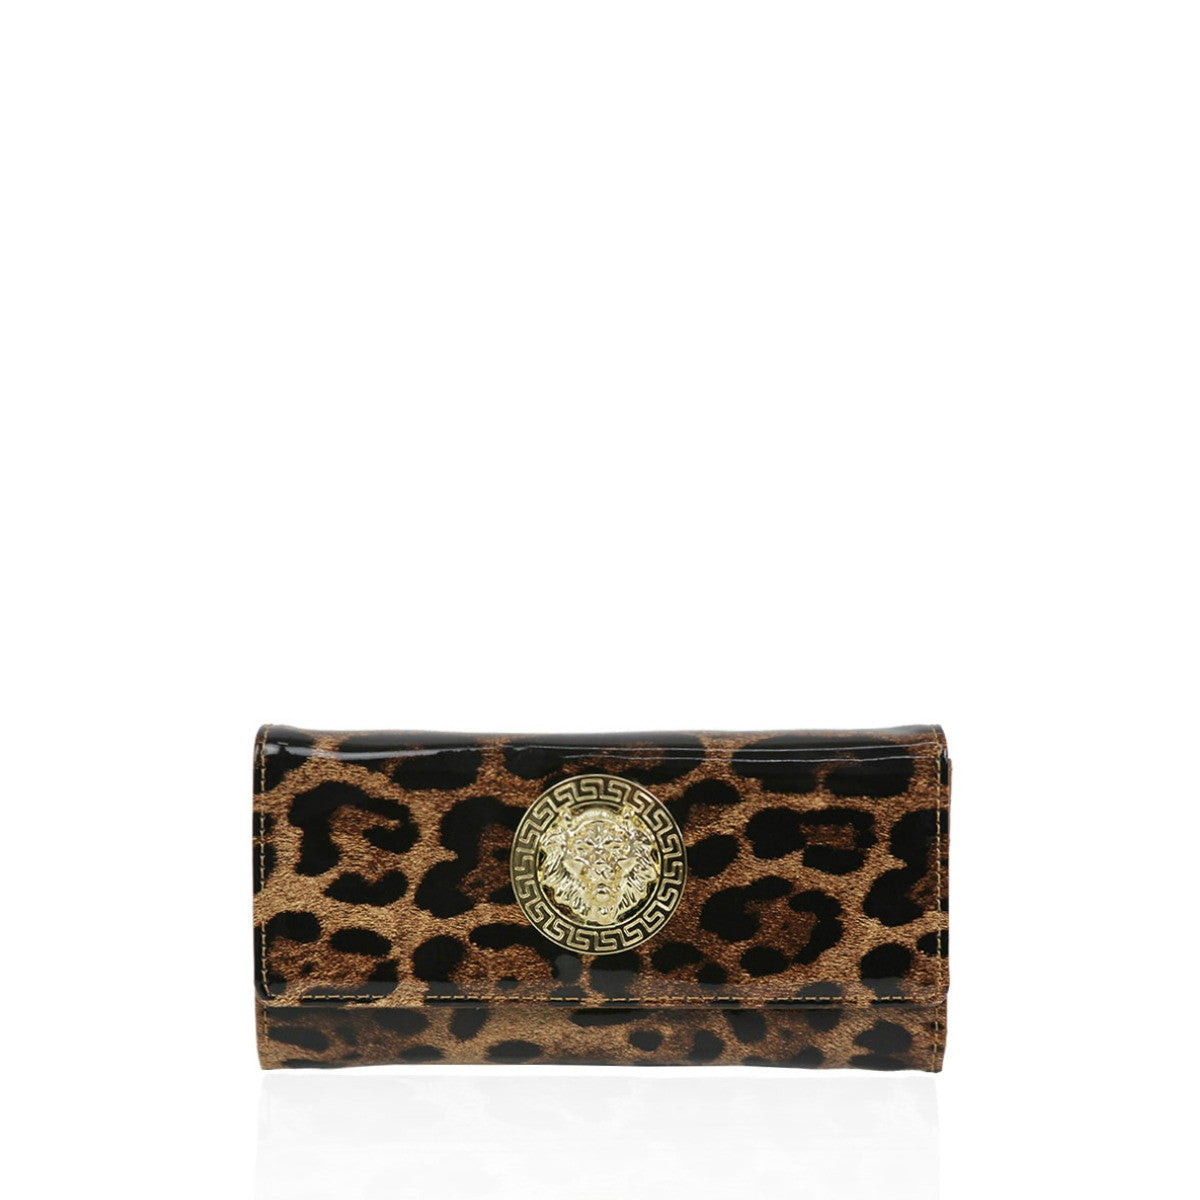 Red Leather Abstract Leopard Print Purse / Clutch - Alicia – Sassy Spirit